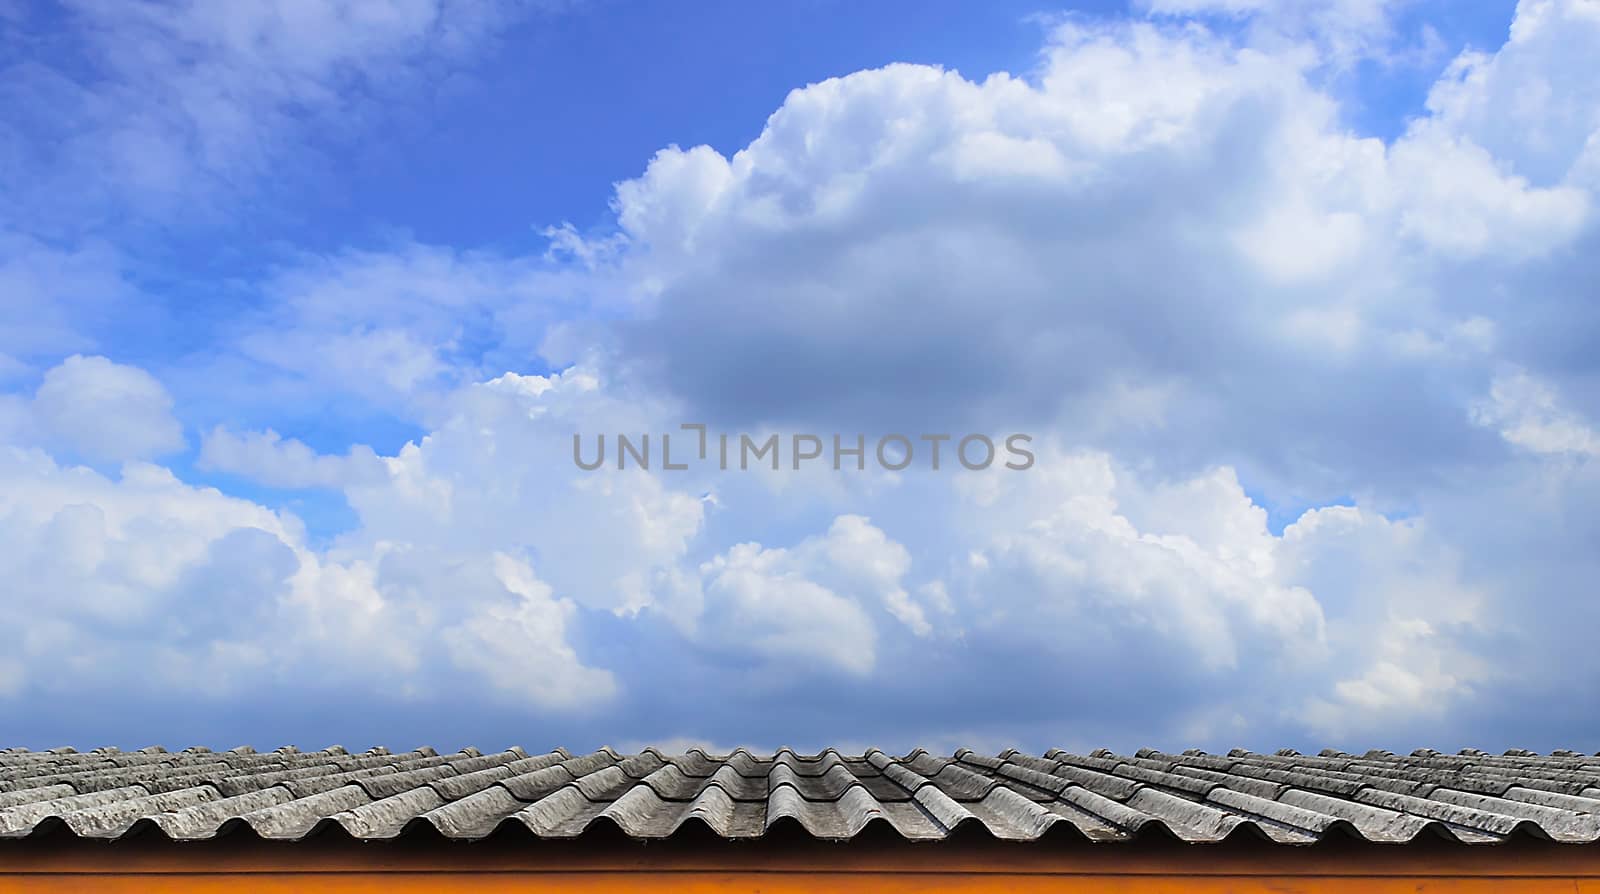 The Roof-Tile and Cloudy Blue Sky.